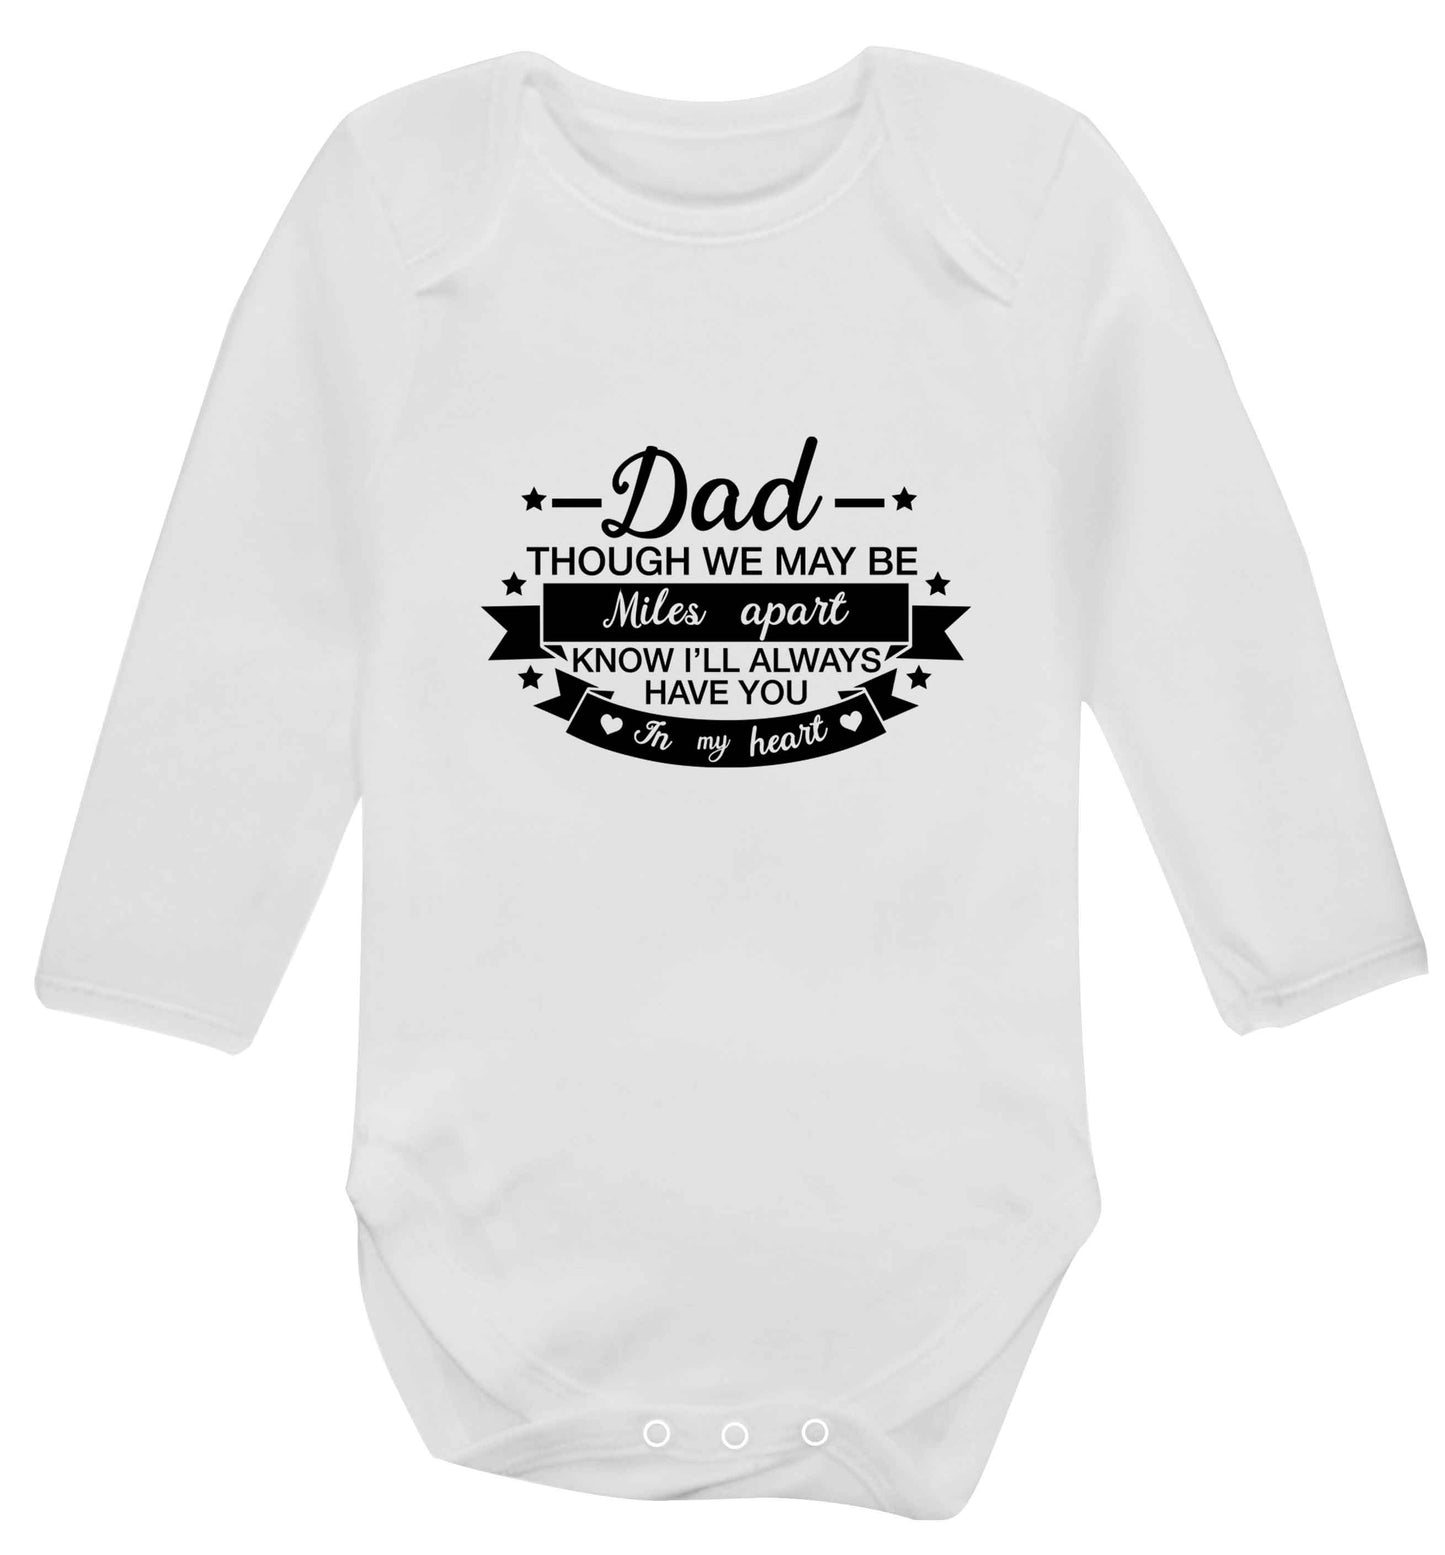 Dad though we are miles apart know I'll always have you in my heart baby vest long sleeved white 6-12 months